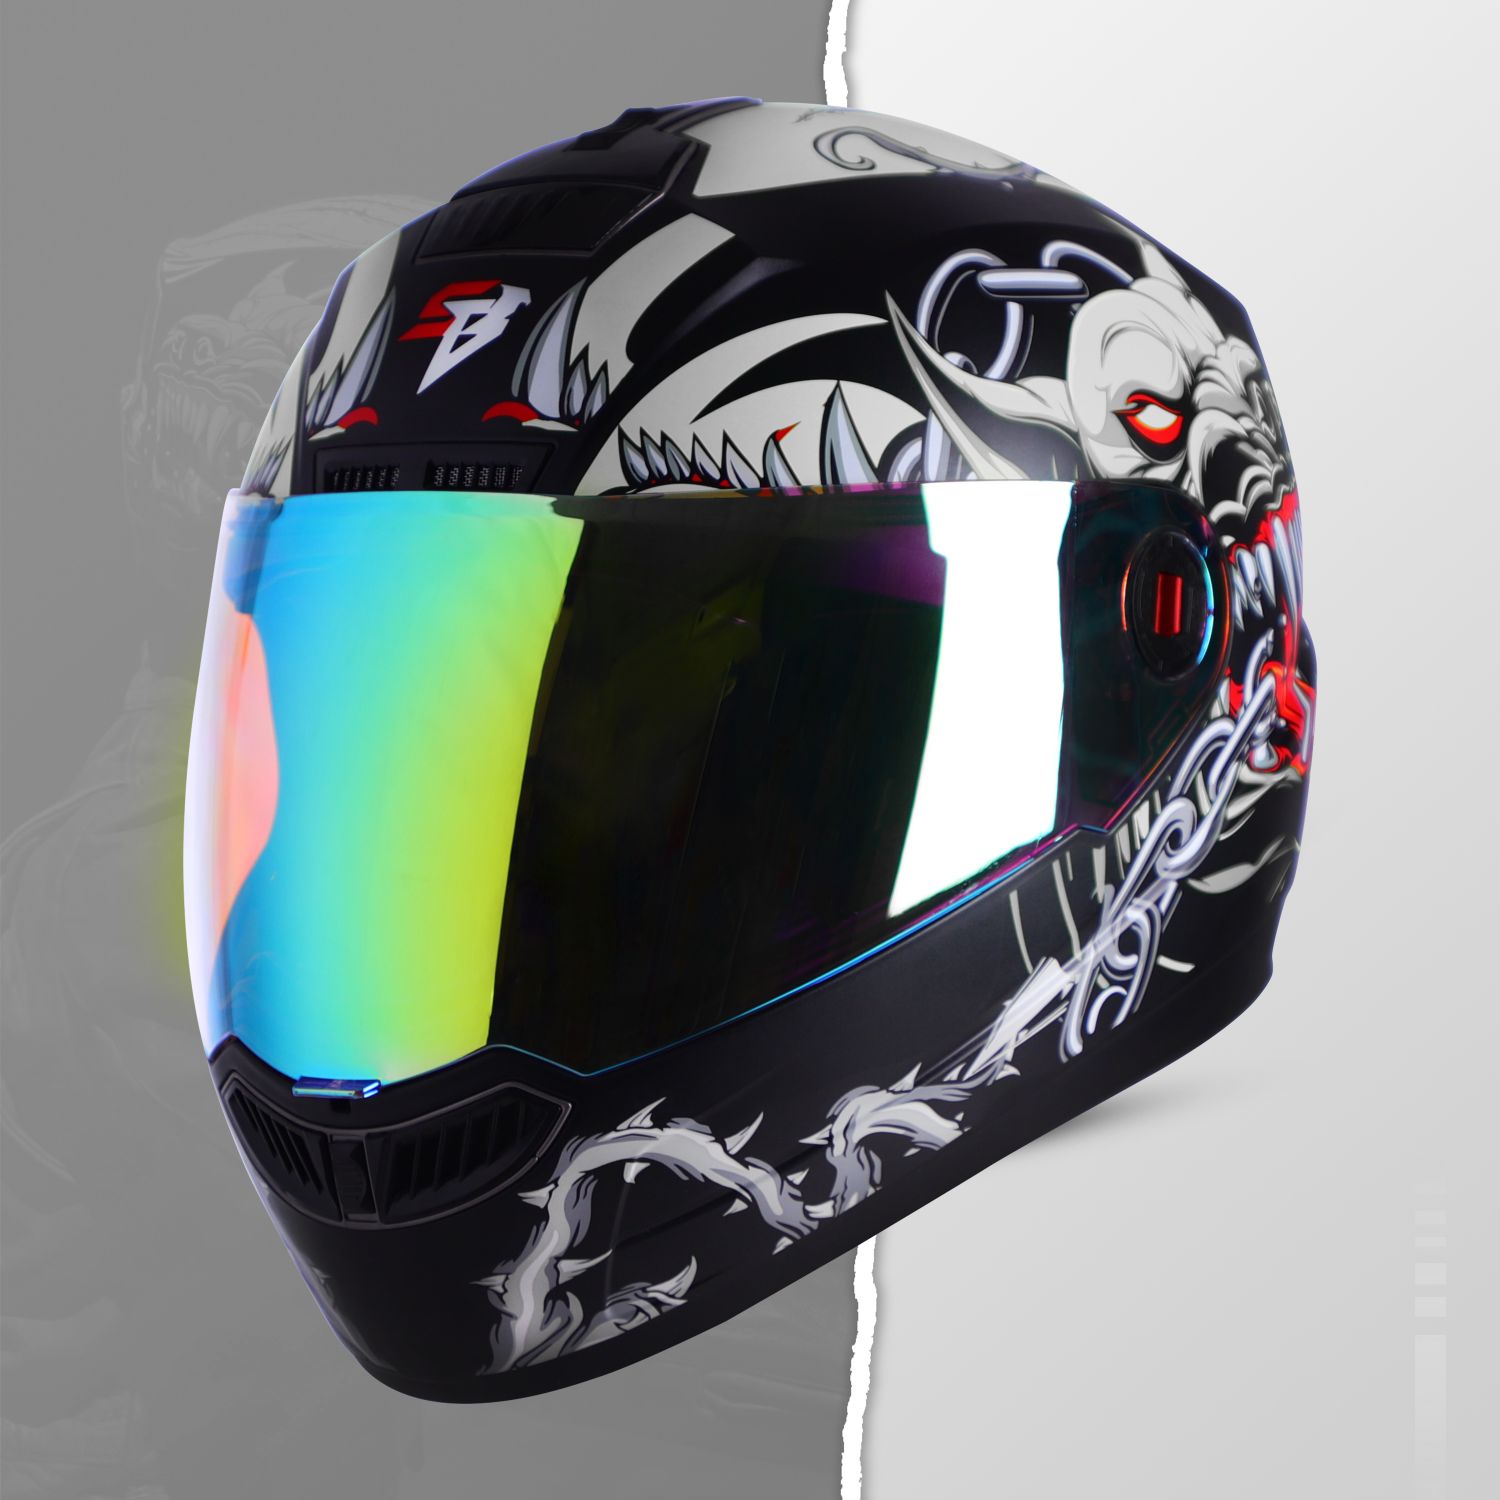 Steelbird SBA-1 Angry Dog ISI Certified Full Face Graphic Helmet For Men And Women (Glossy Black Grey With Night Vision Rainbow Visor)